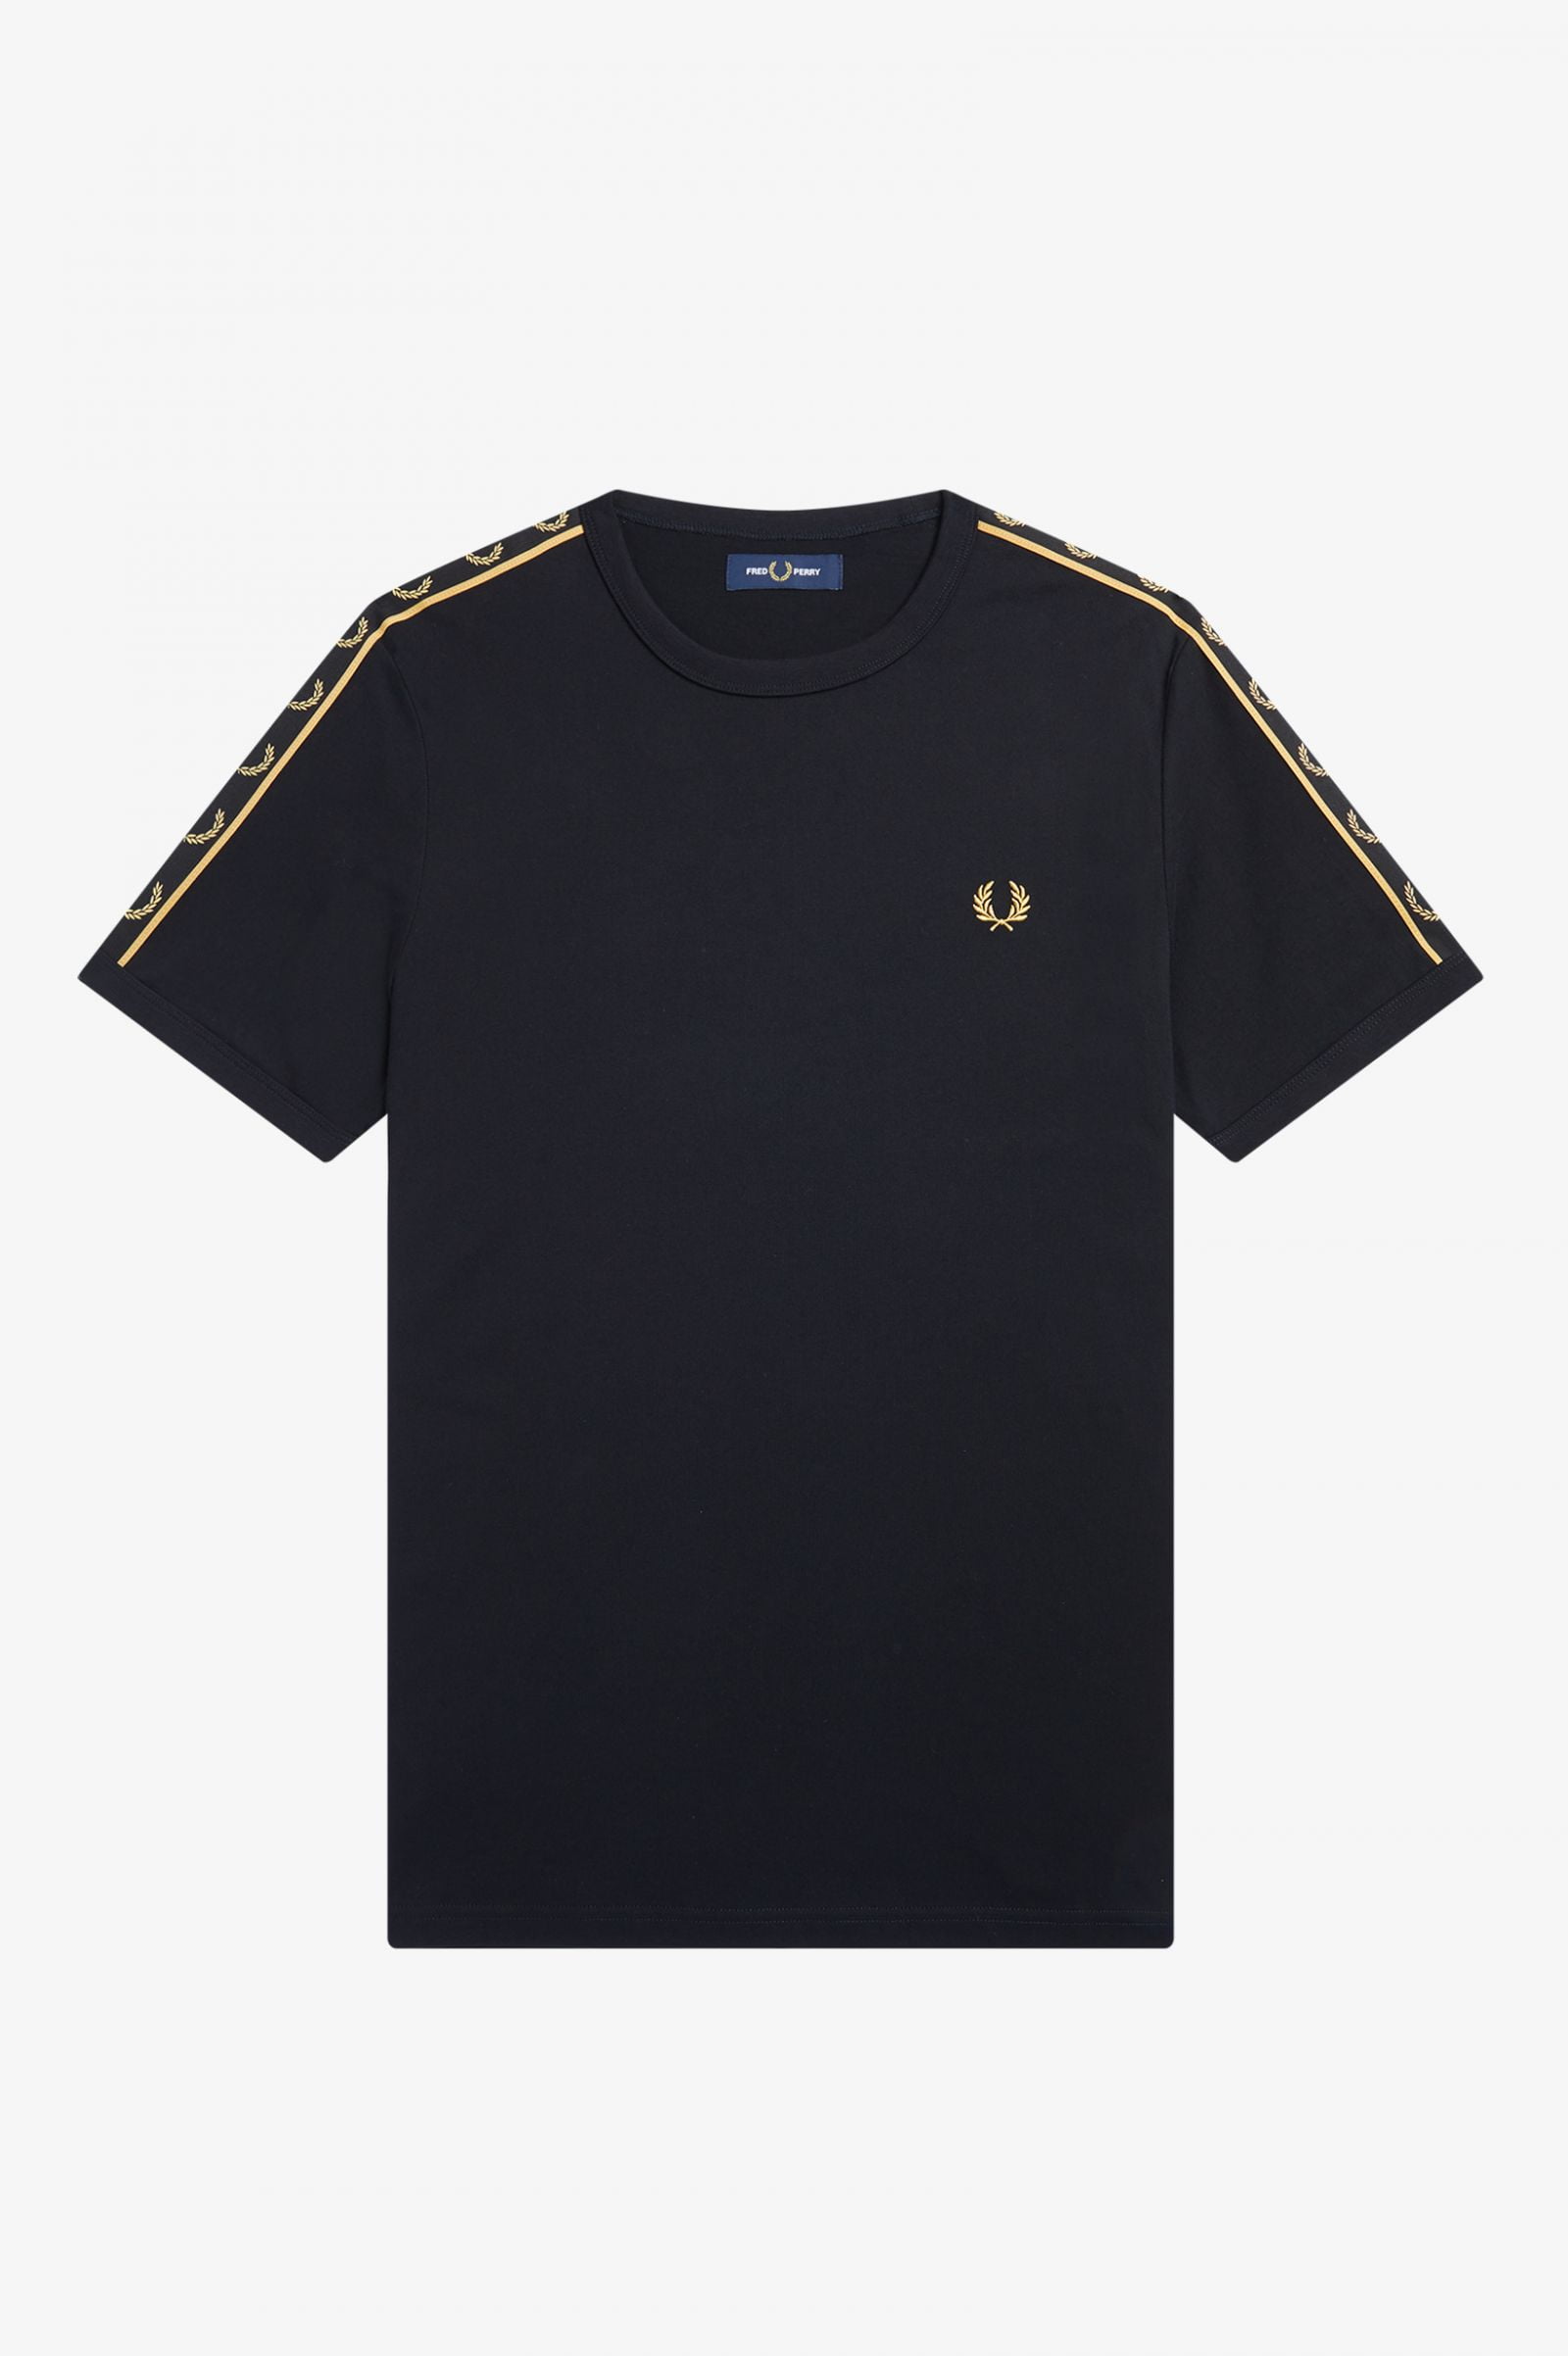 Fred Perry T-Shirt Contrast Tape Ringer Black/Gold